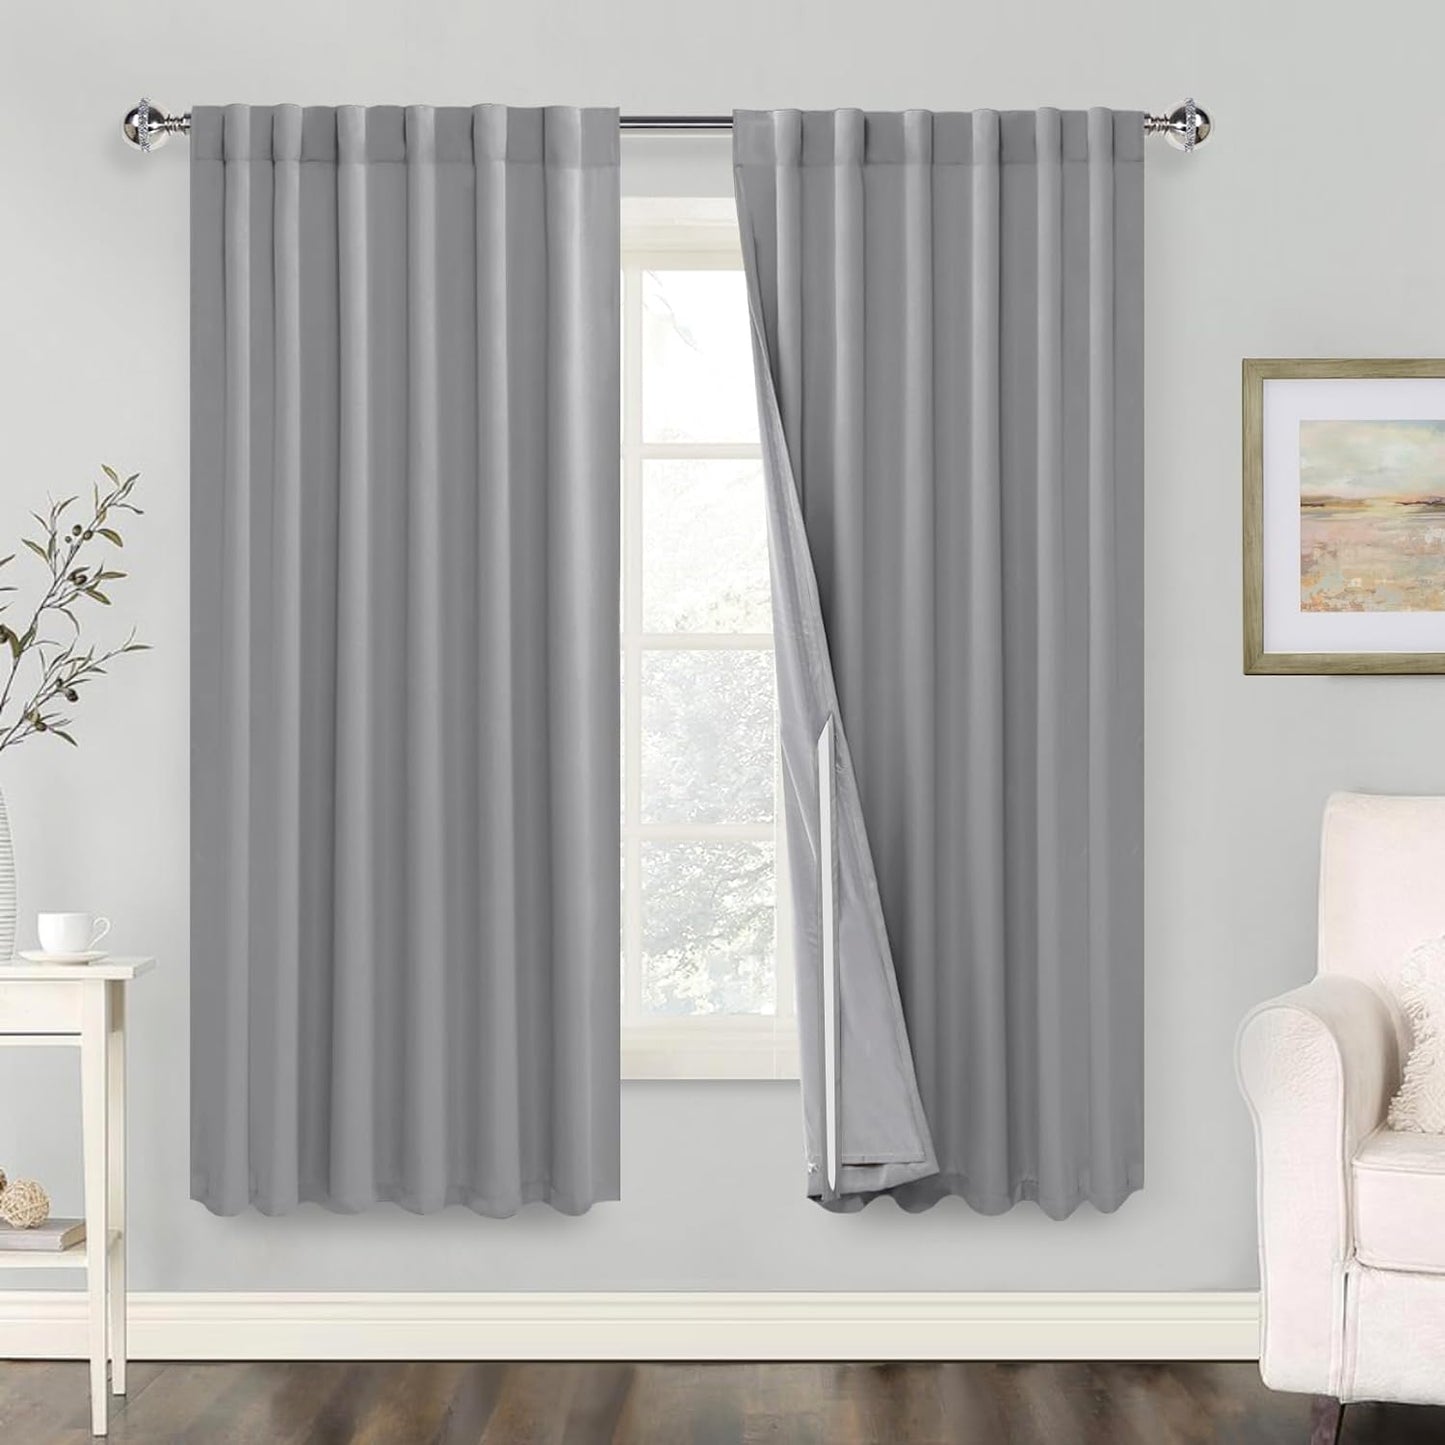 100% Blackout Curtains 2 Panels with Tiebacks- Heat and Full Light Blocking Window Treatment with Black Liner for Bedroom/Nursery, Rod Pocket & Back Tab，White, W52 X L84 Inches Long, Set of 2  XWZO Silver Grey W52" X L63"|2 Panels 